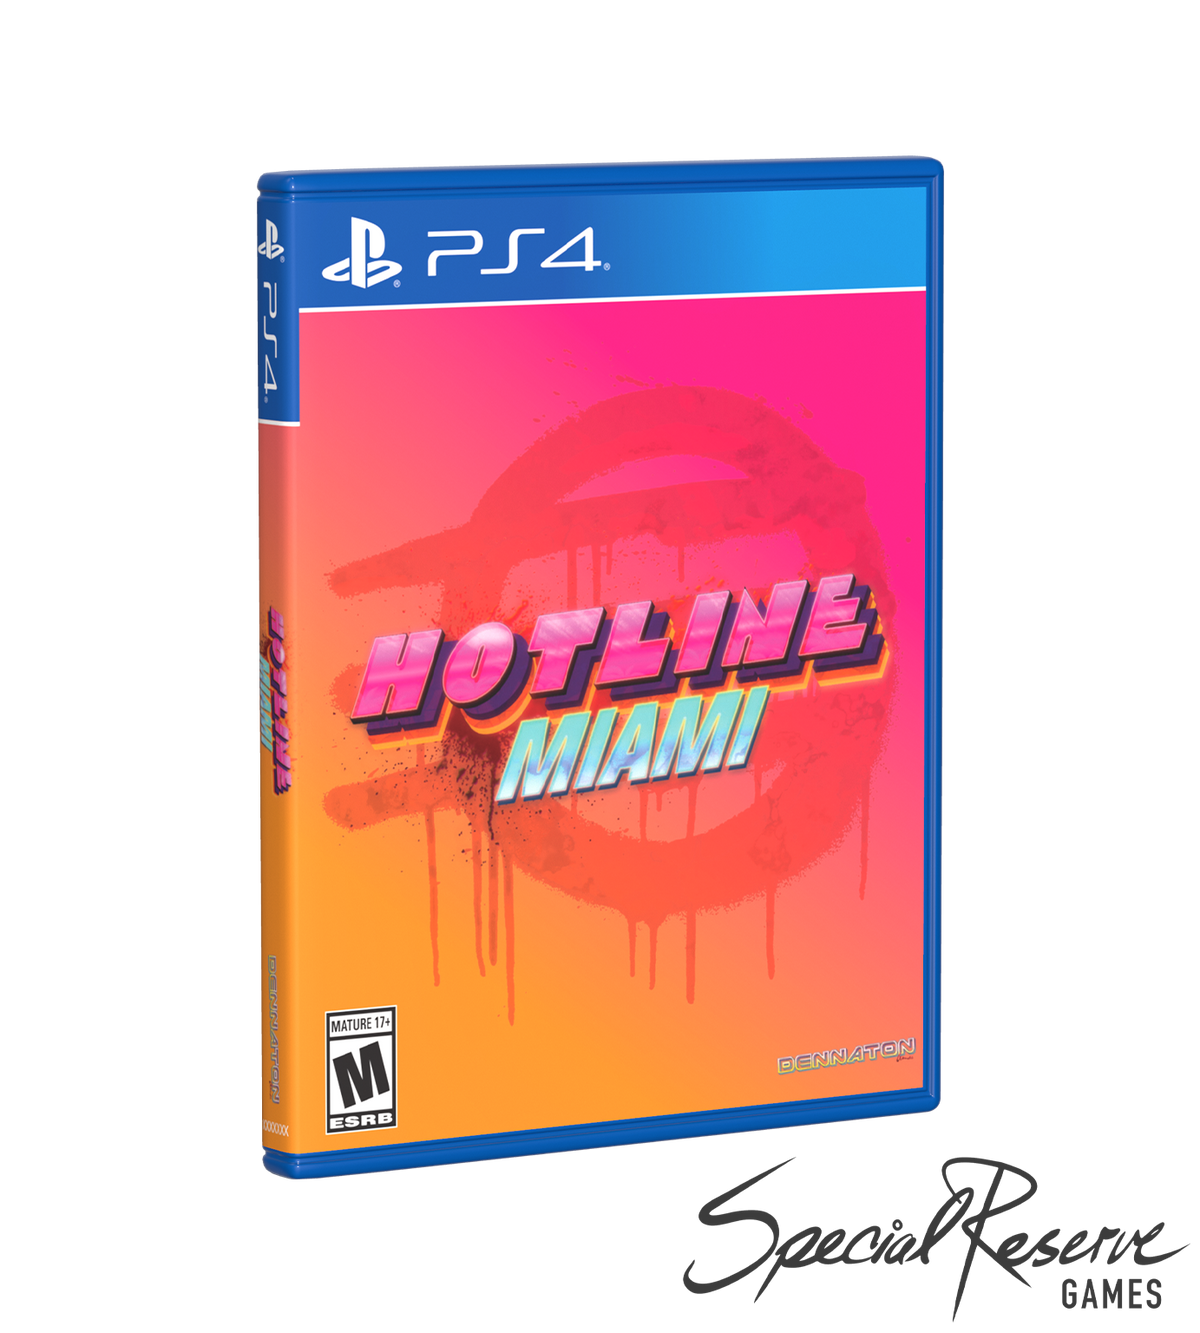 Hotline (PS4) Exclusive Variant – Limited Run Games